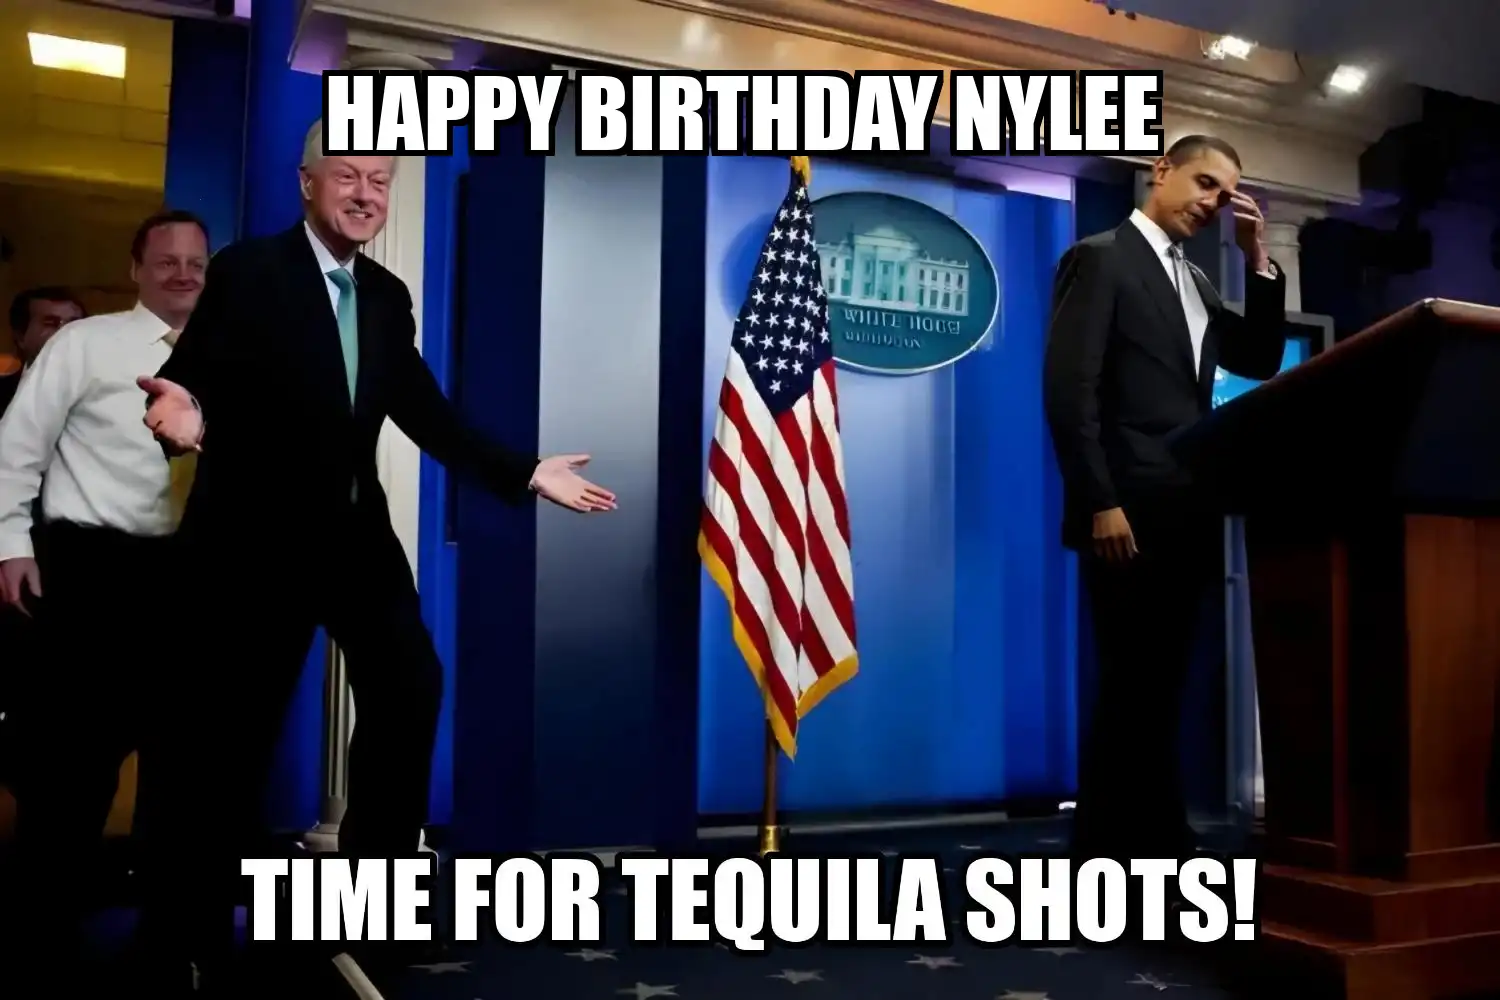 Happy Birthday Nylee Time For Tequila Shots Memes